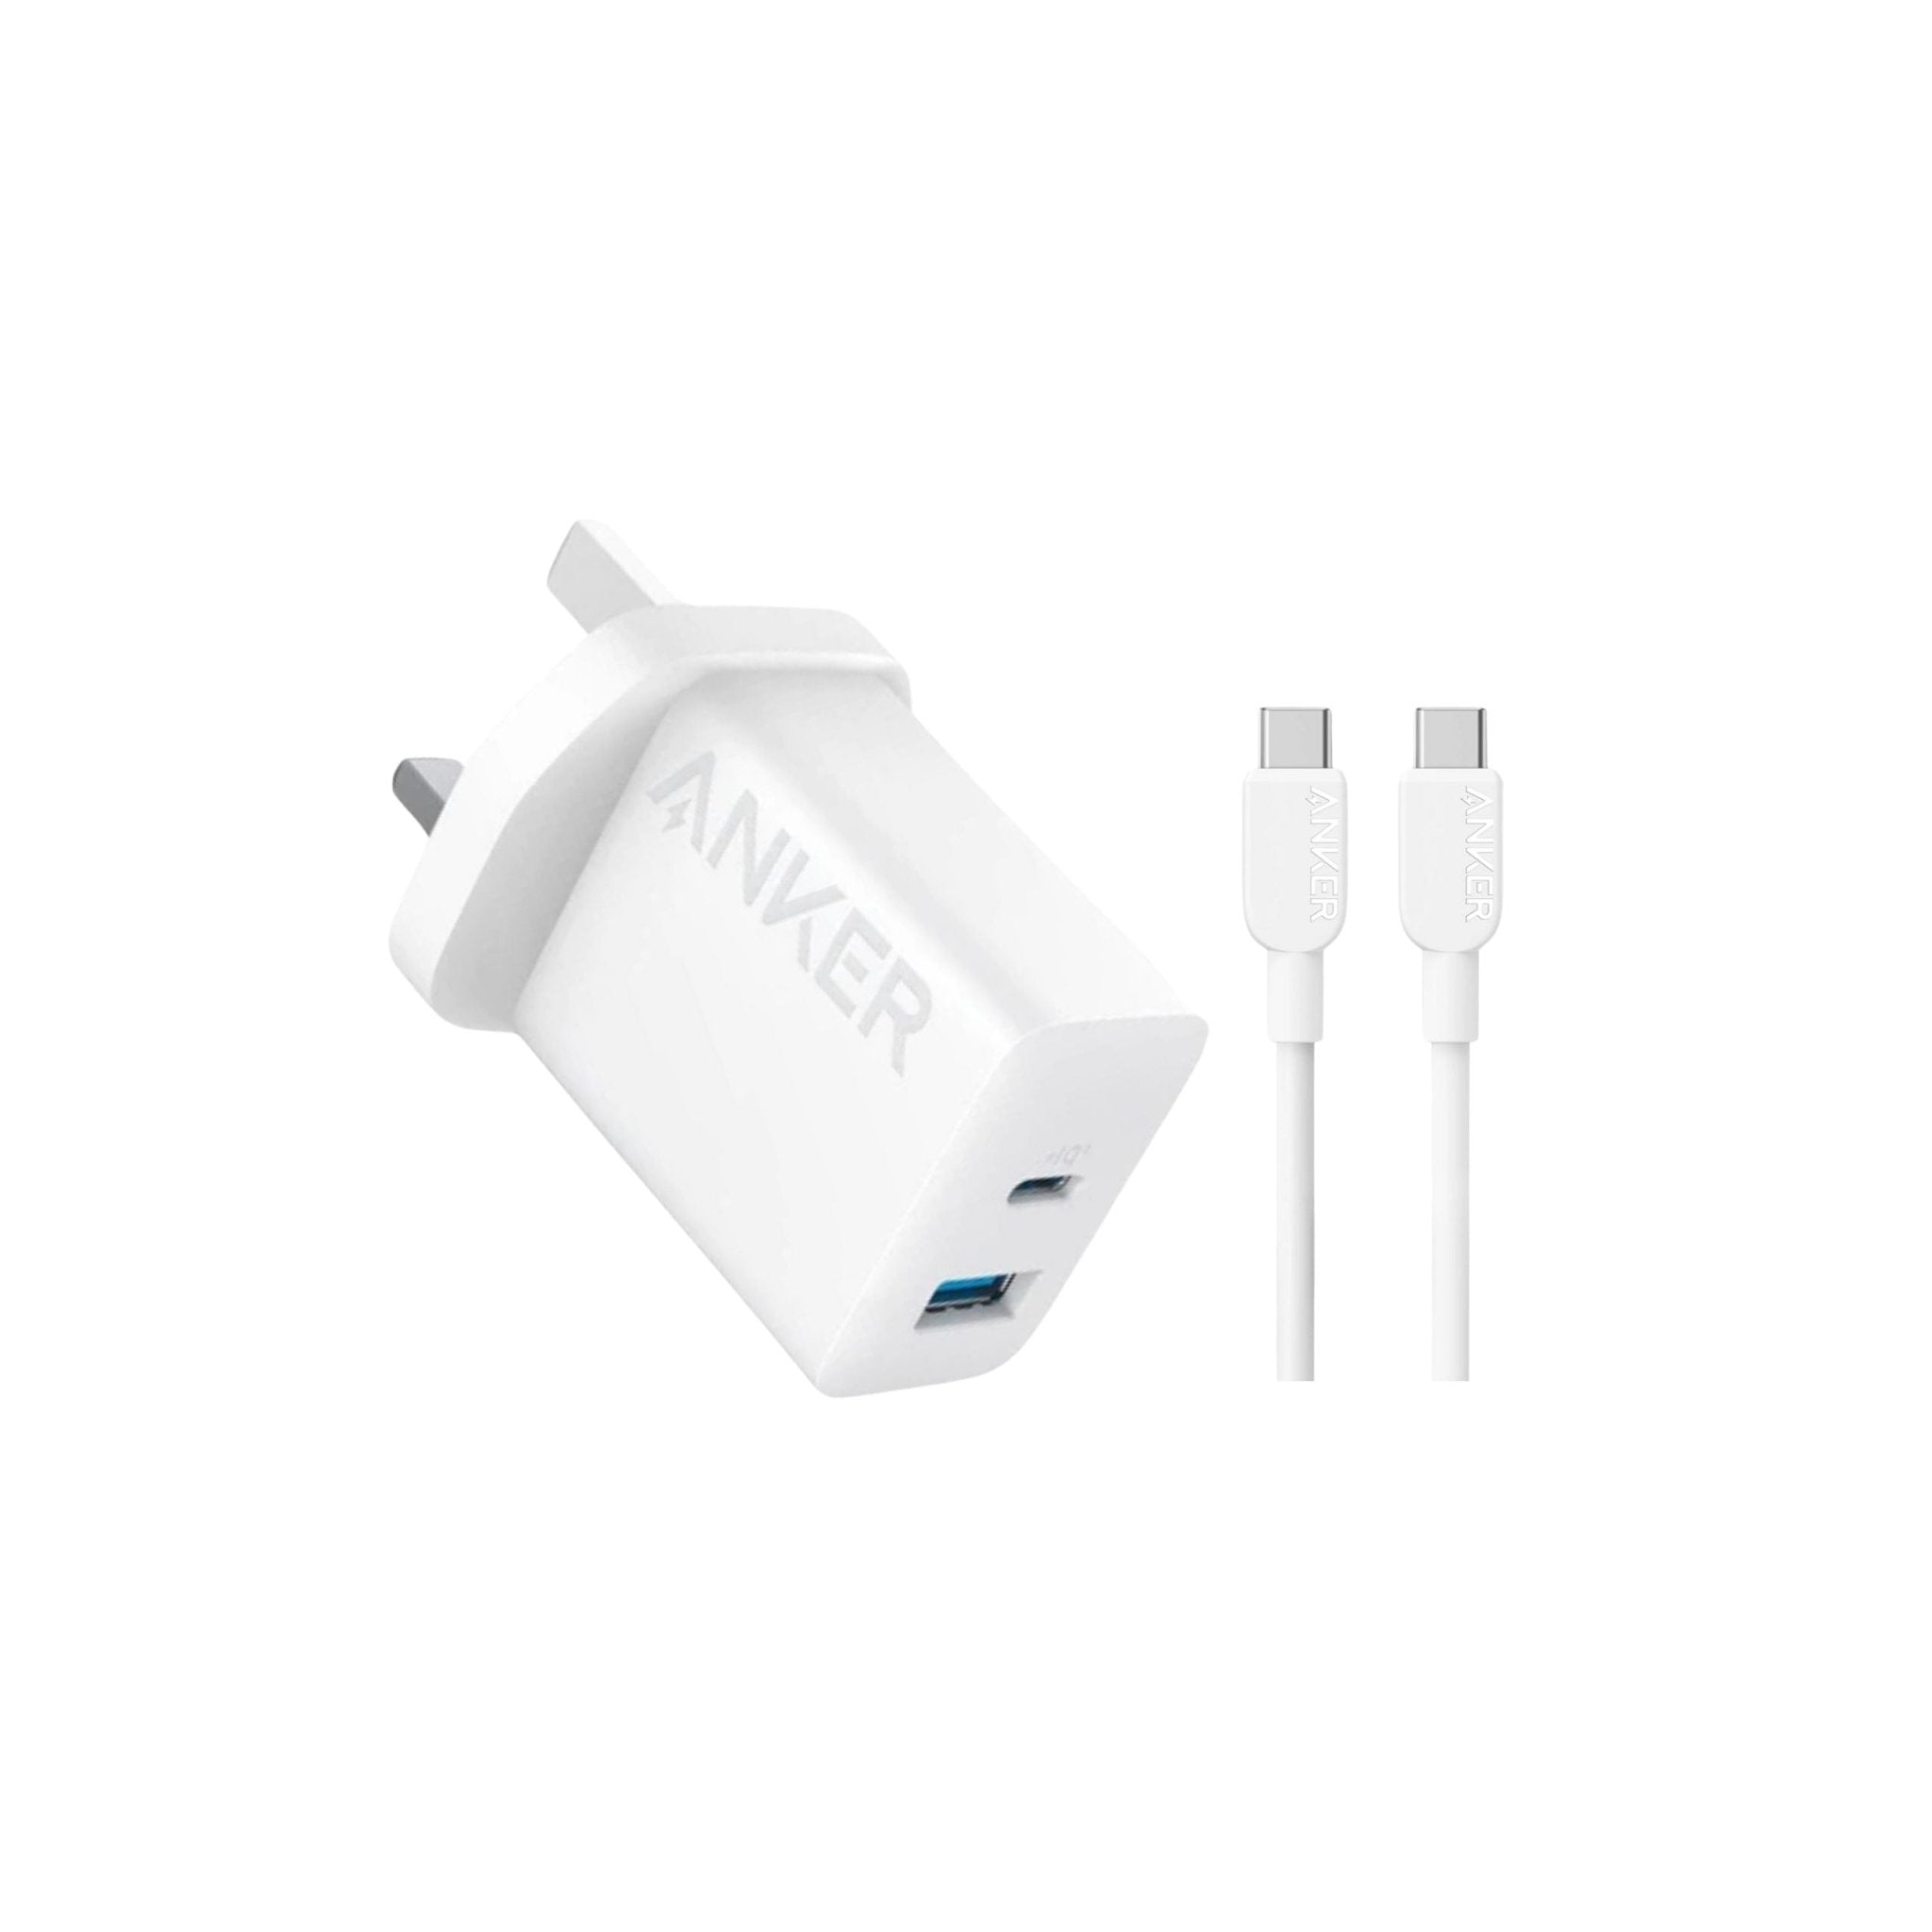 Anker 20W Dual Port High Speed Charger with USB C to USB C Cable 1.5m - White